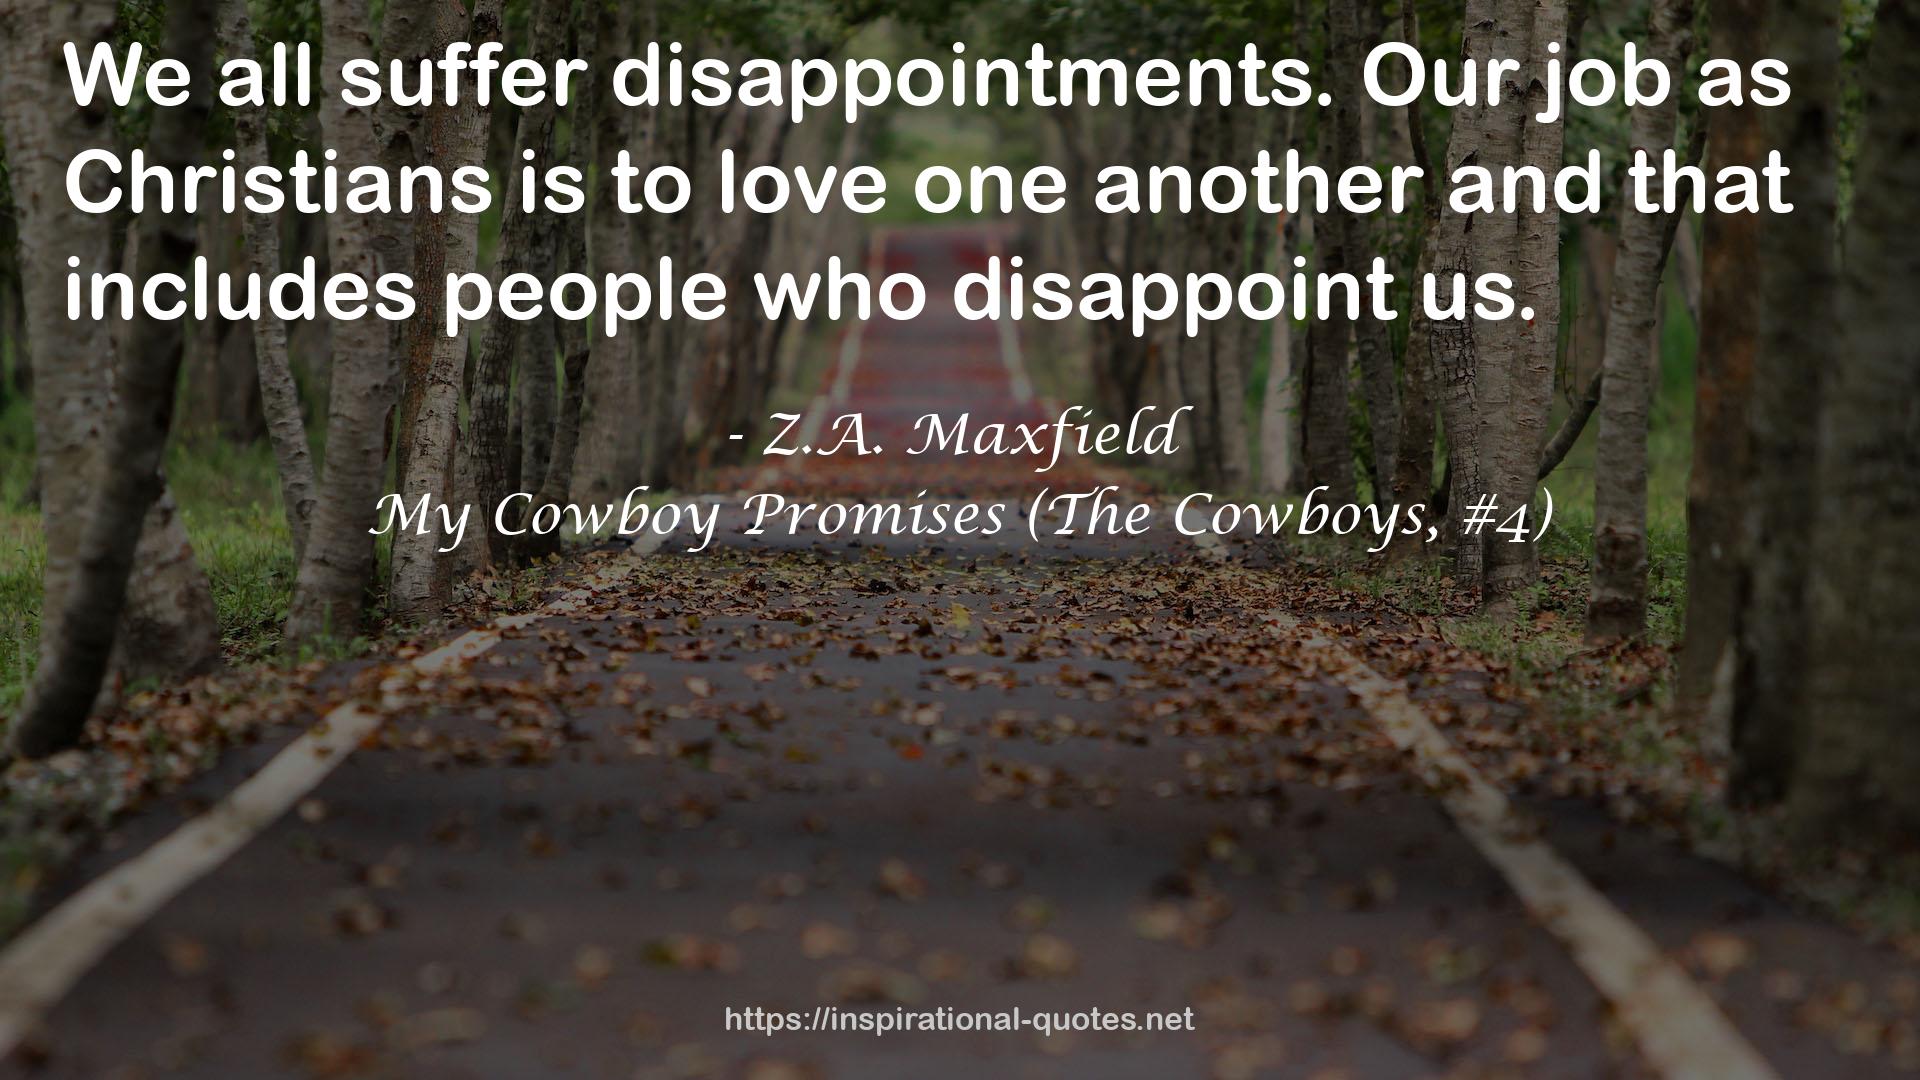 My Cowboy Promises (The Cowboys, #4) QUOTES